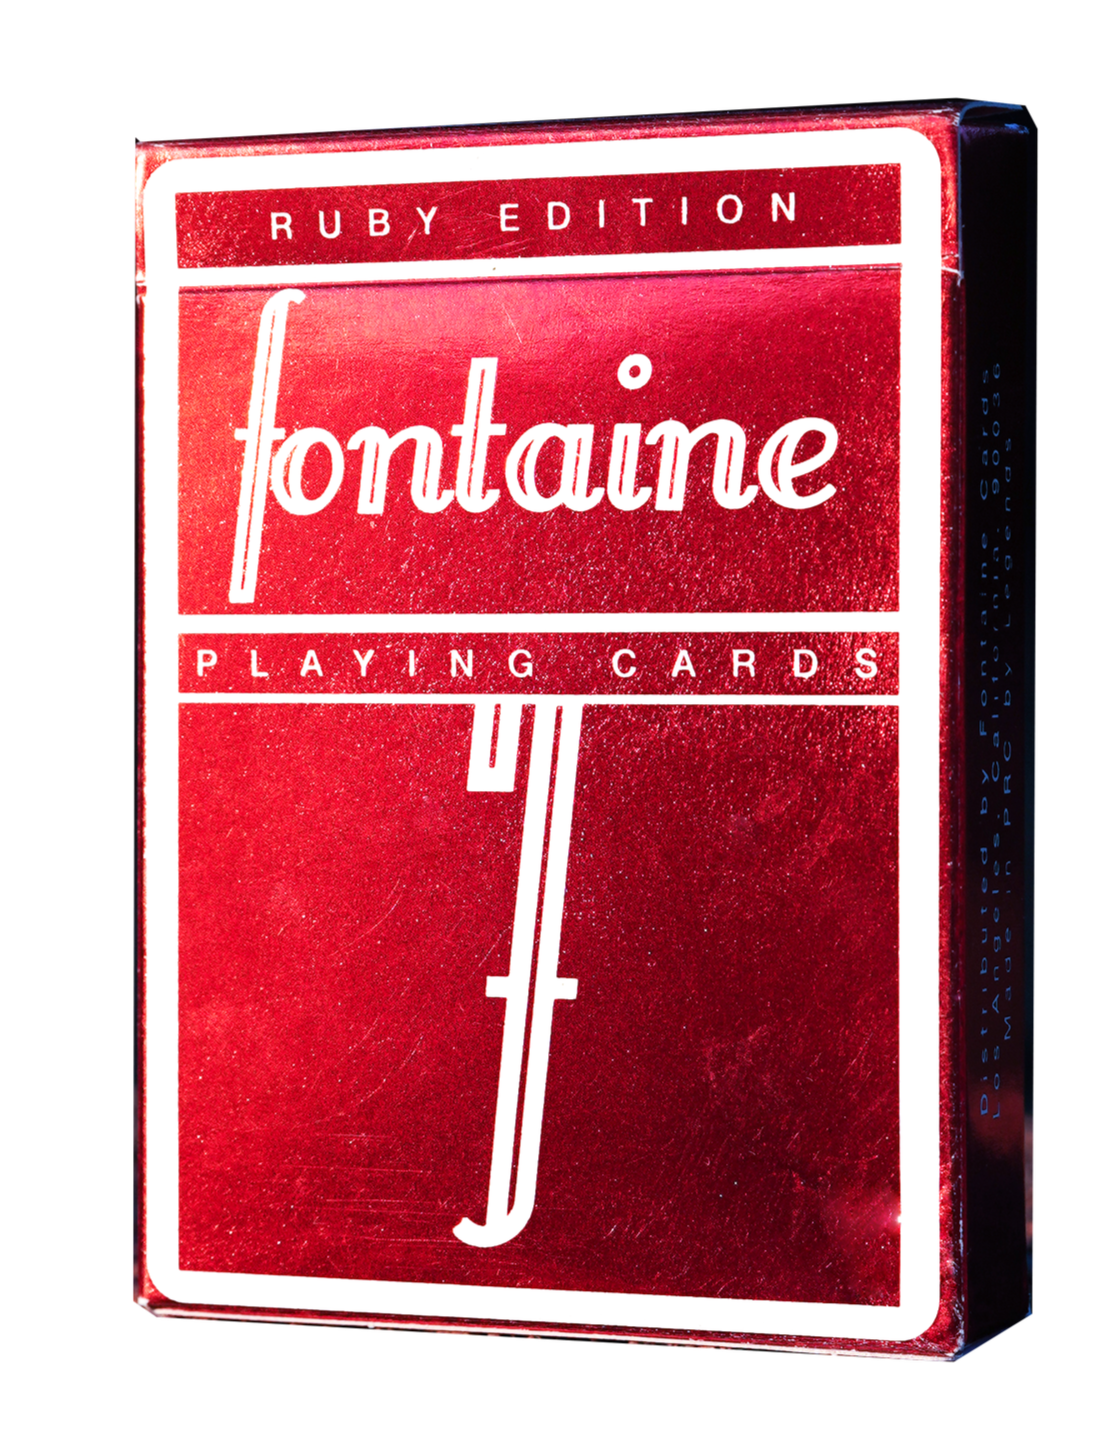 FONTAINE PLAYING CARDS RUBY, cardistry deck magic RED fontaine cards –  Paperdecks